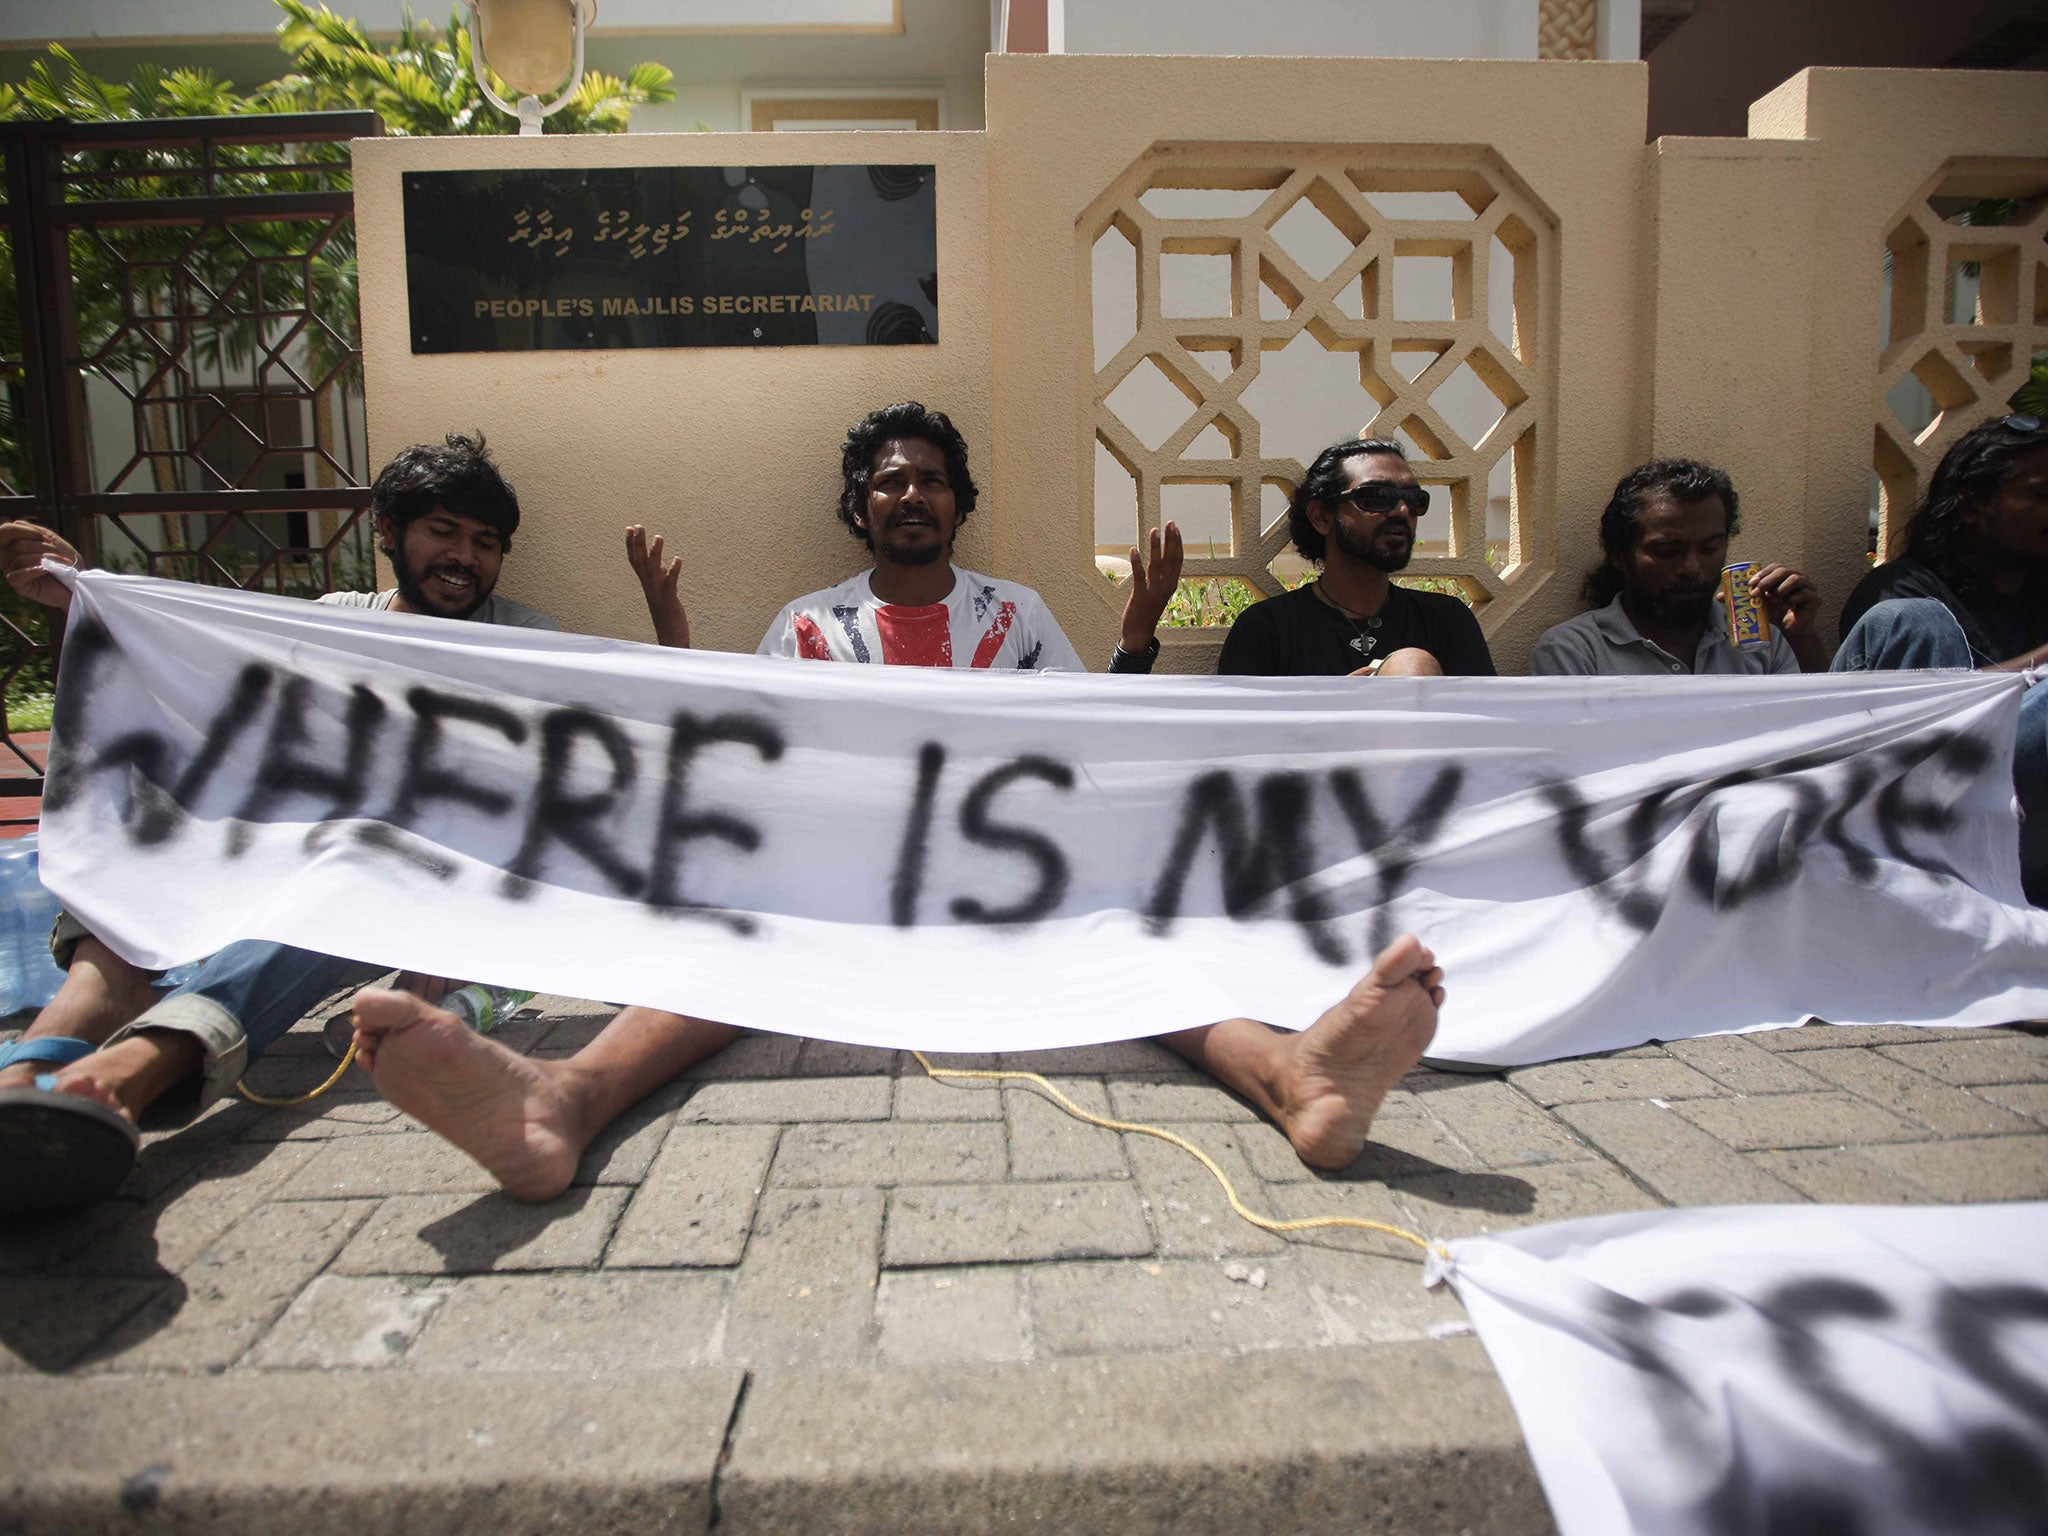 Protestors demonstrate in the Maldives – evidence, the Government says, of its openness and willingness to address issues of democracy and human rights